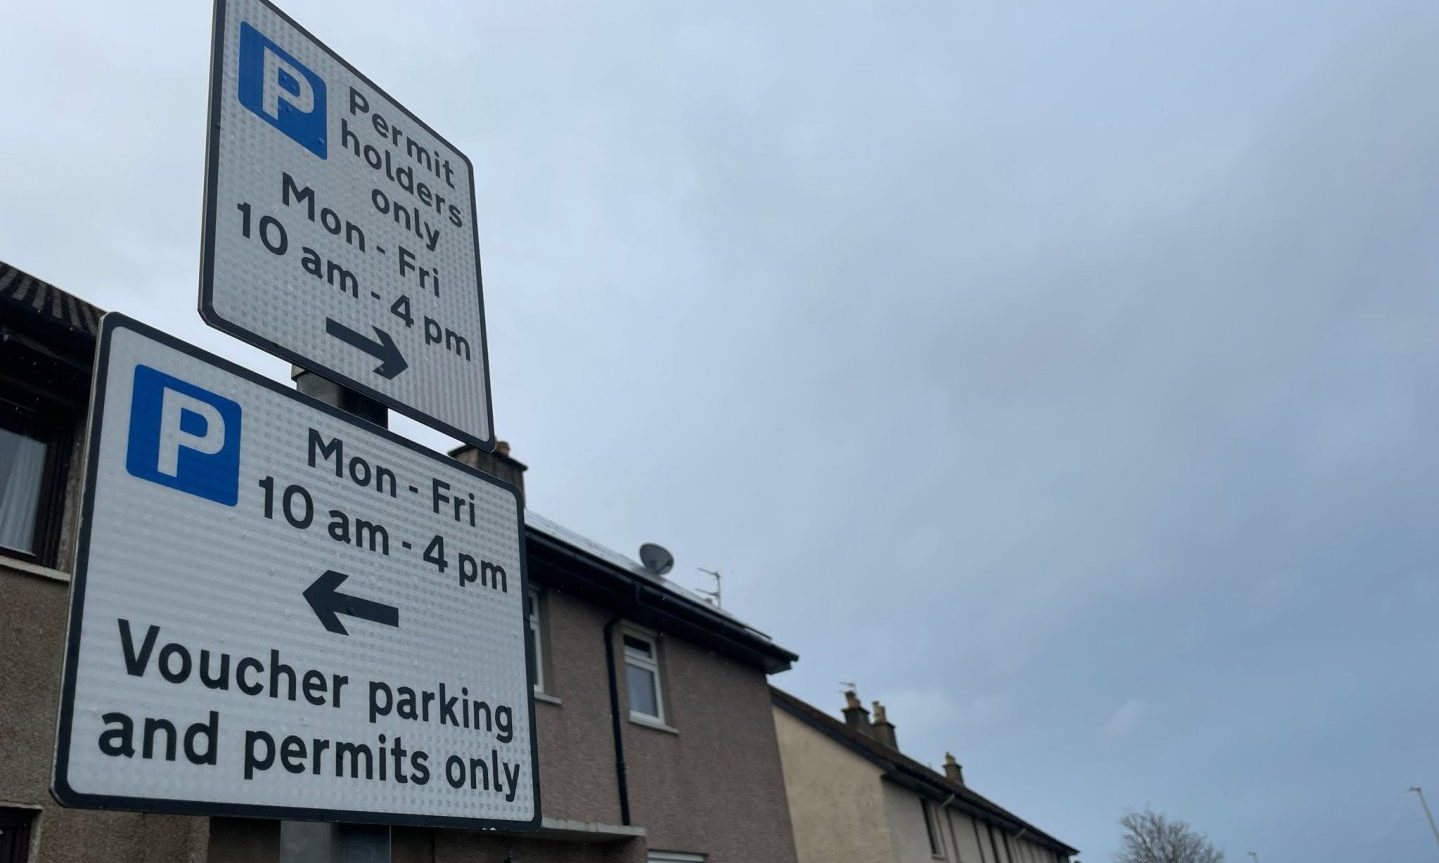 'Permit holders only' sign in controlled parking zone in Garthdee.